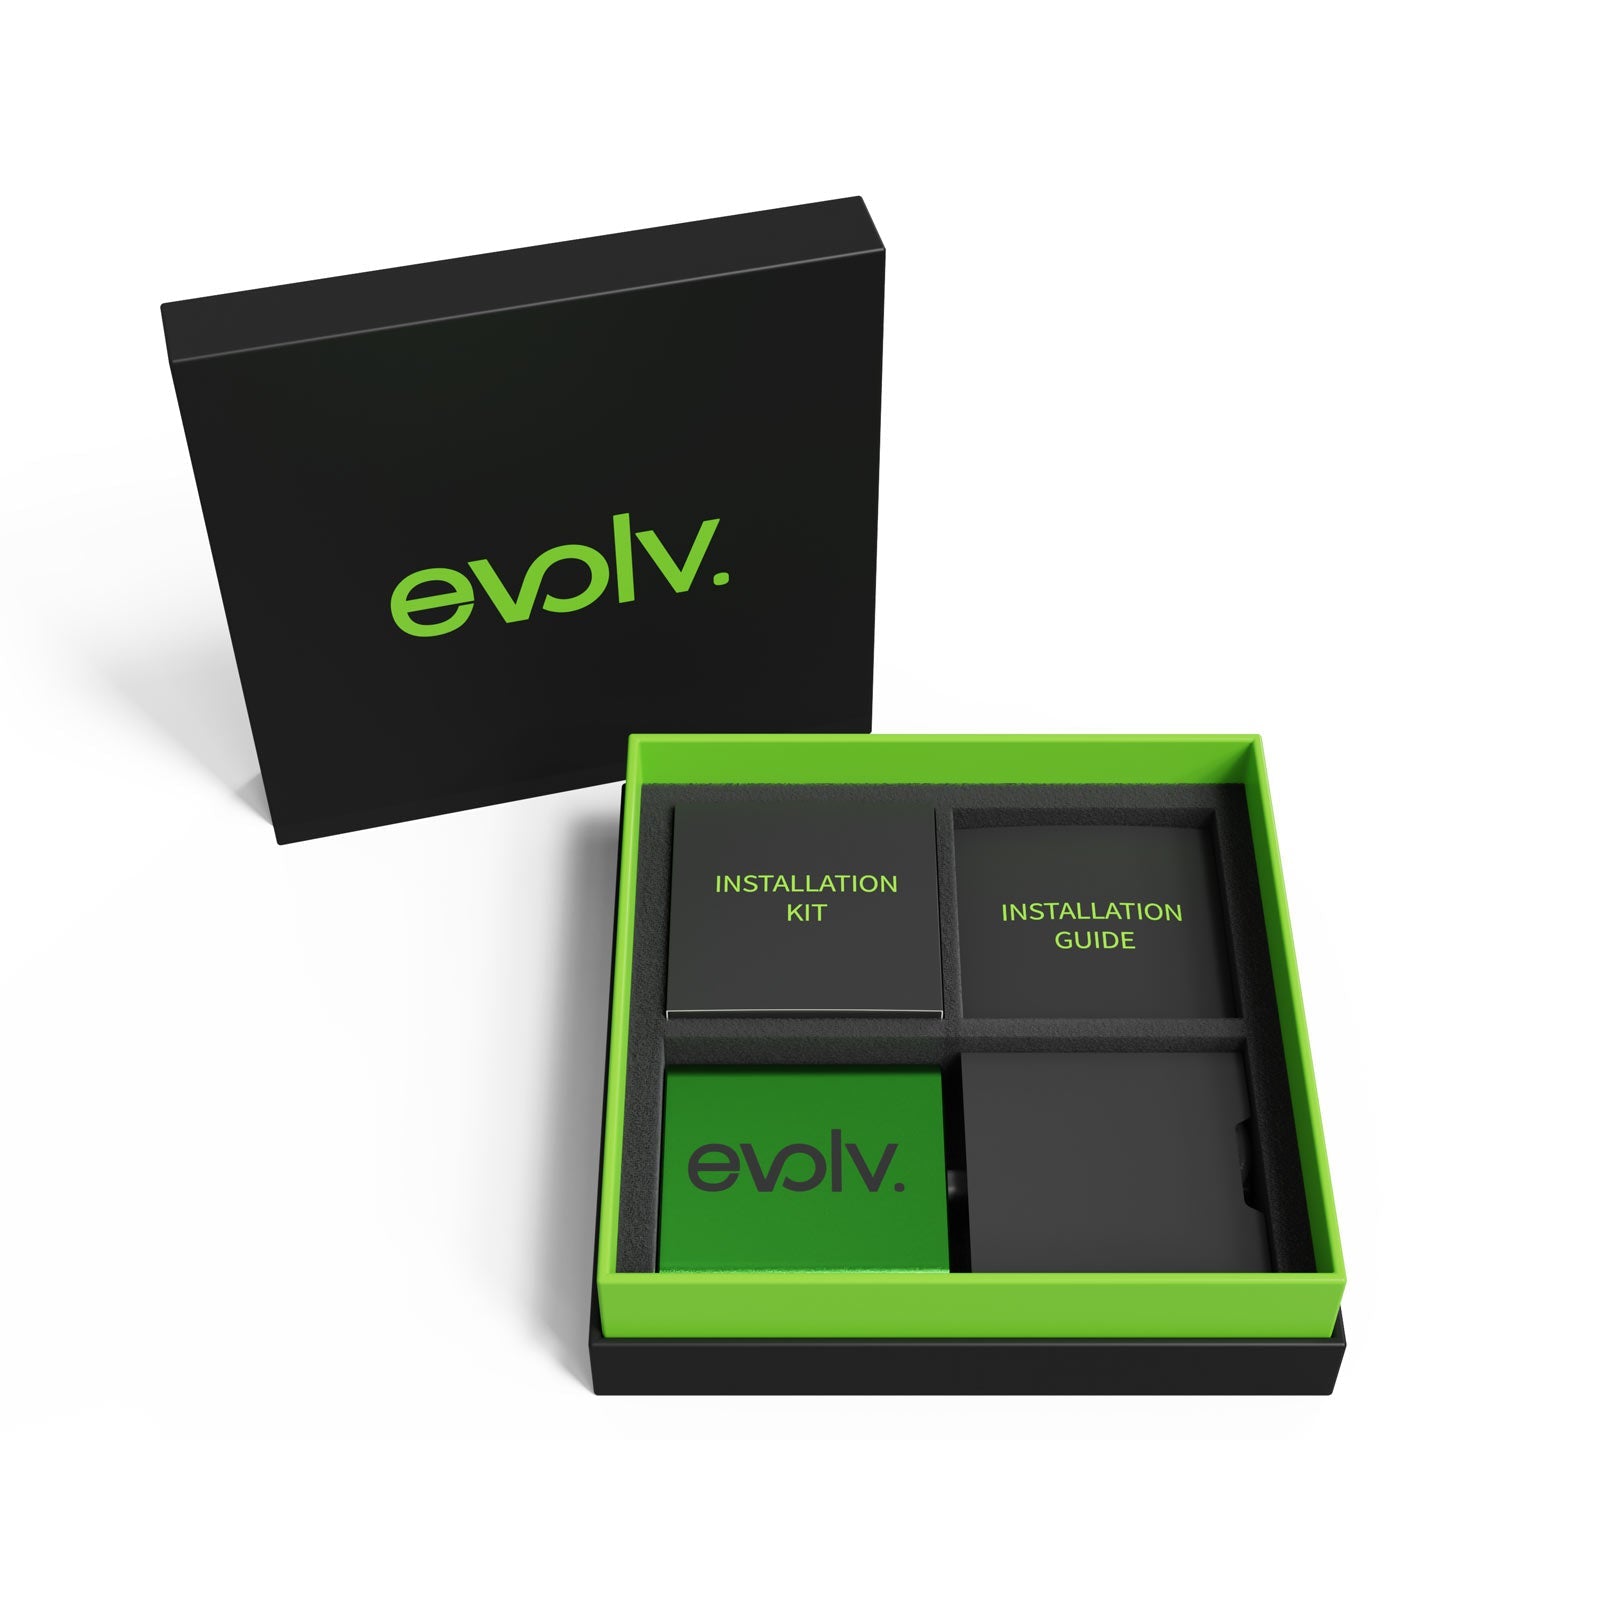 Increase your fuel mileage, performance and throttle response with an Evolv Kia Amanti Performance Chip!